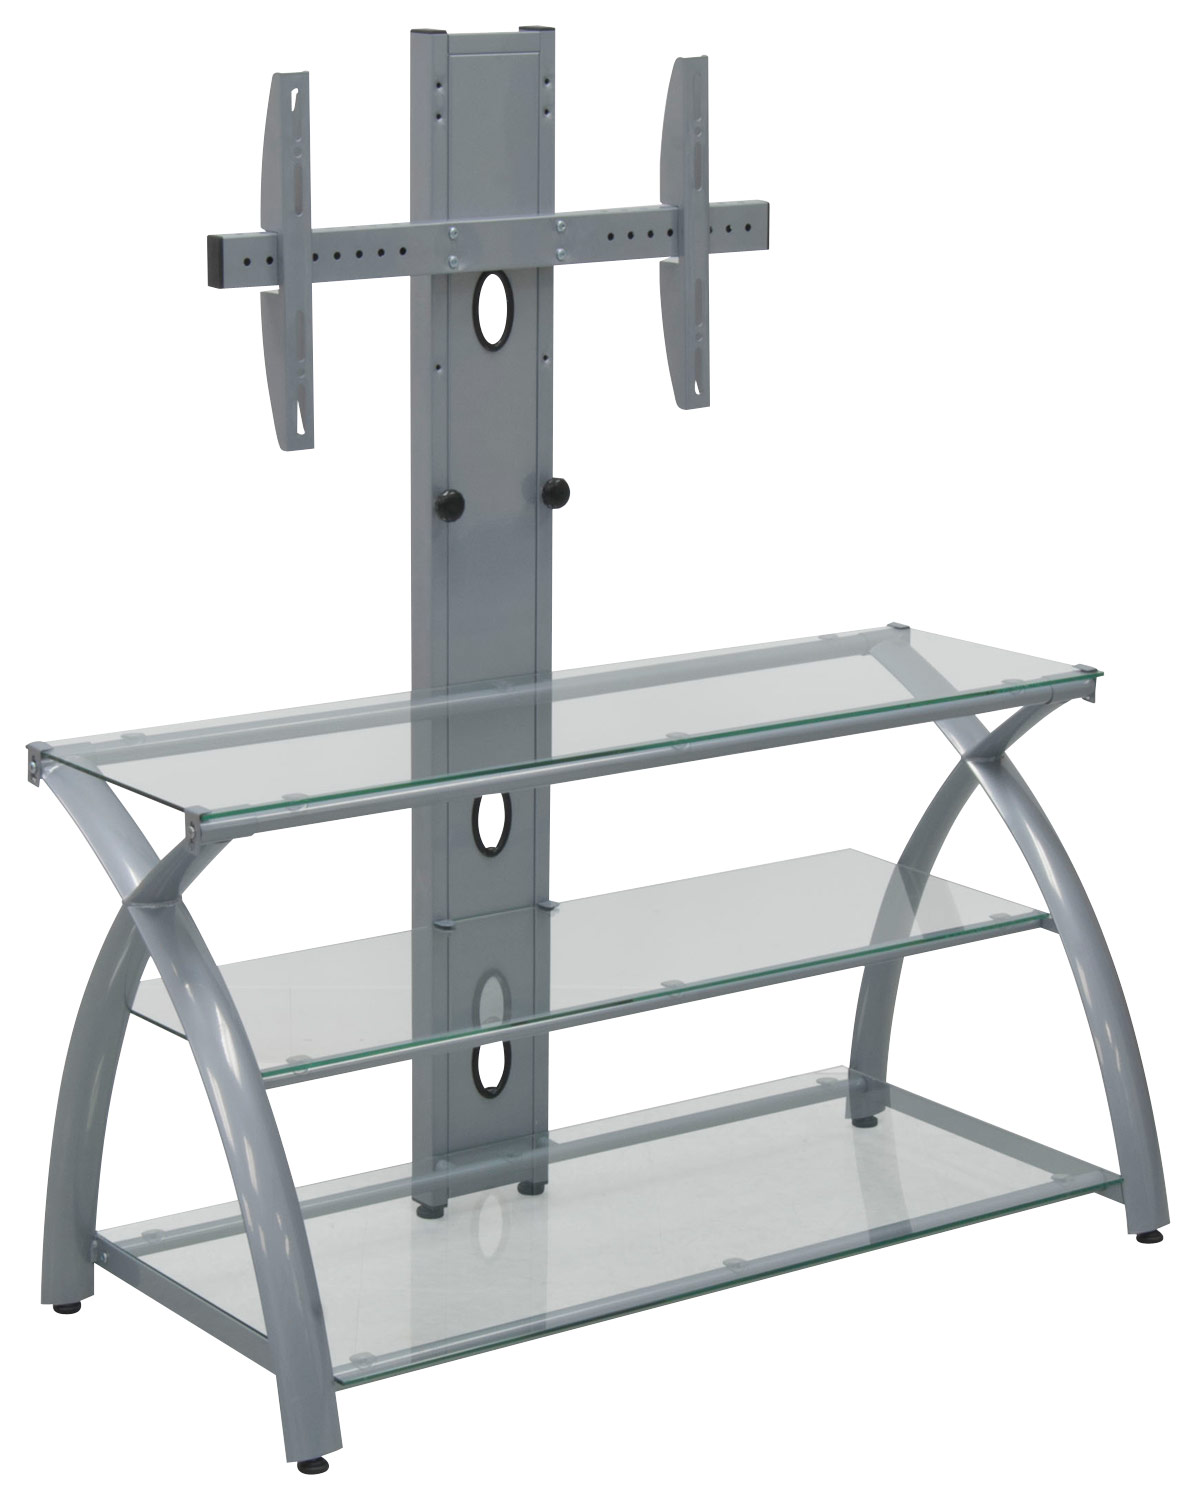 Calico Designs - Futura 3-Tier TV Stand with Tower for Most Flat-Panel TVs Up to 46" - Silver